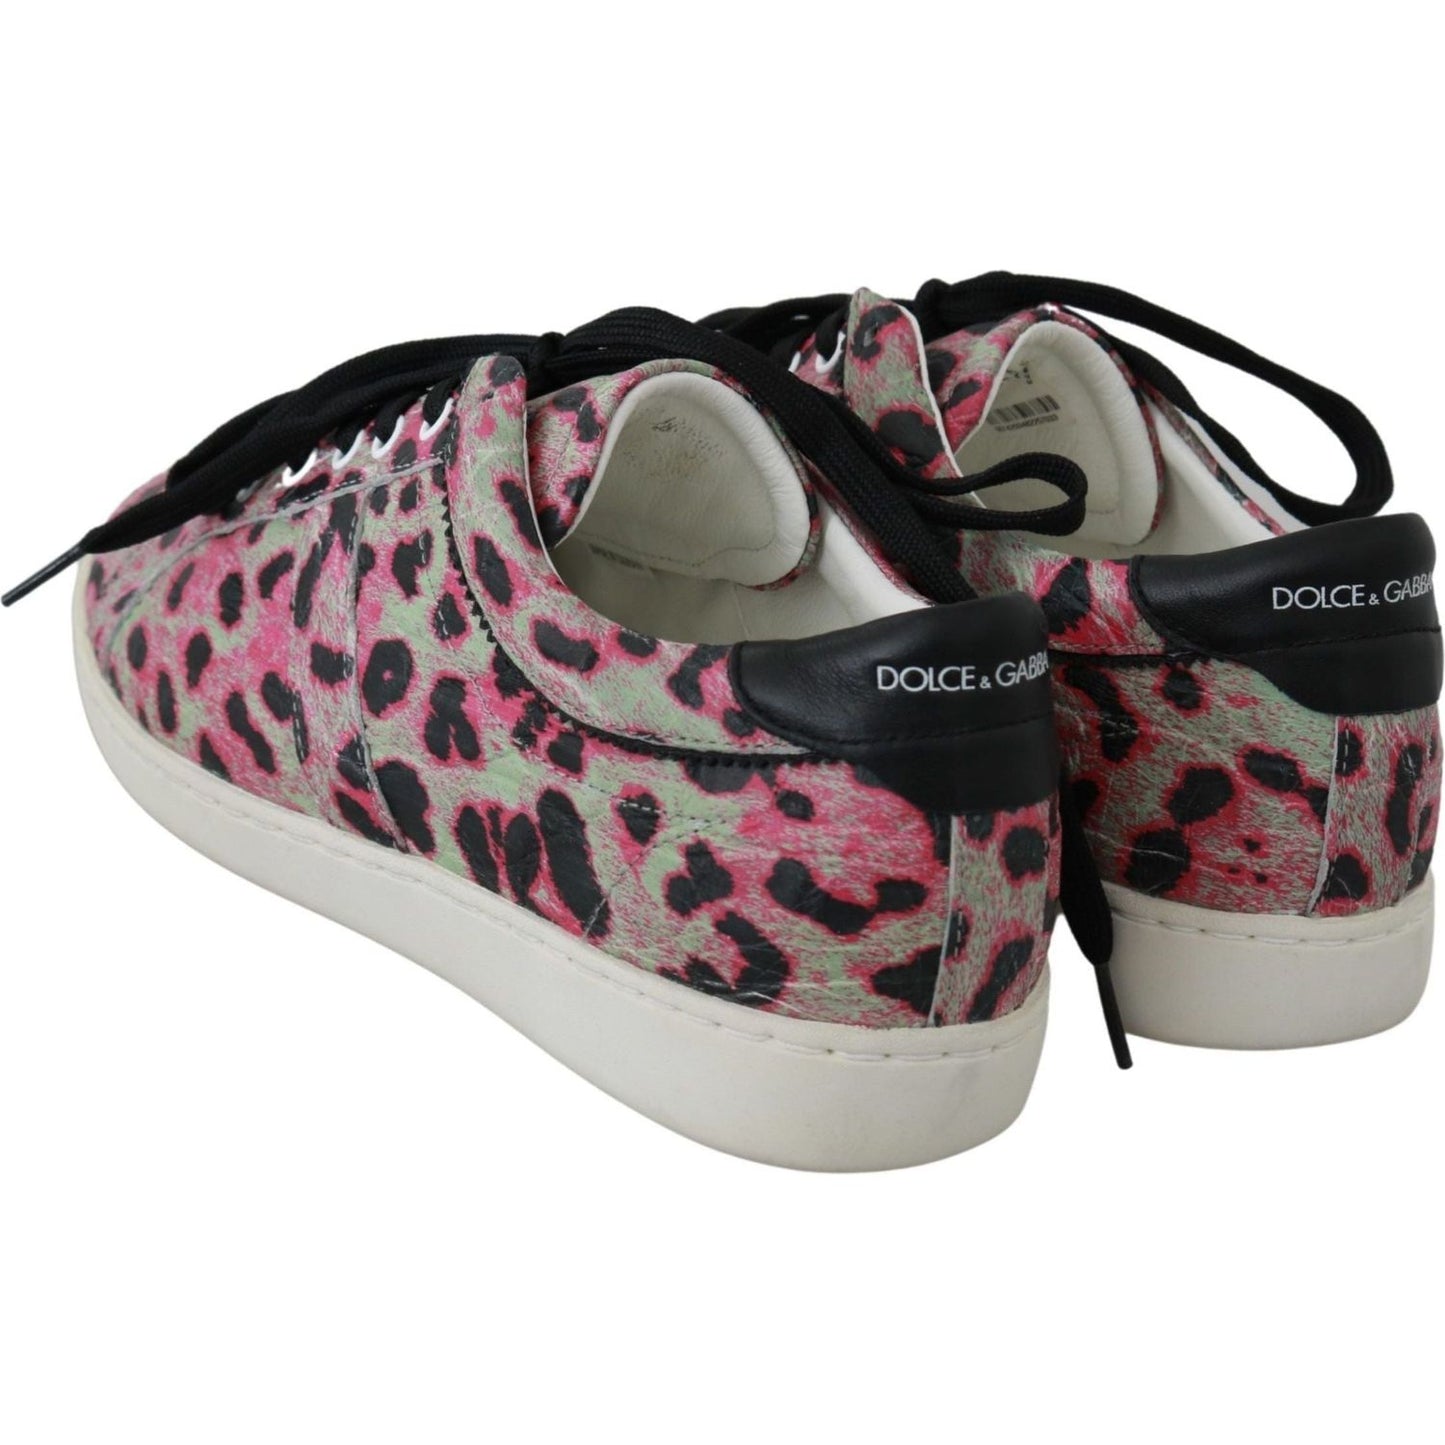 Dolce & Gabbana Multicolor Crocodile Leather Sneakers pink-leopard-print-training-leather-flat-sneakers IMG_9747-scaled-1947cbf6-5a7.jpg